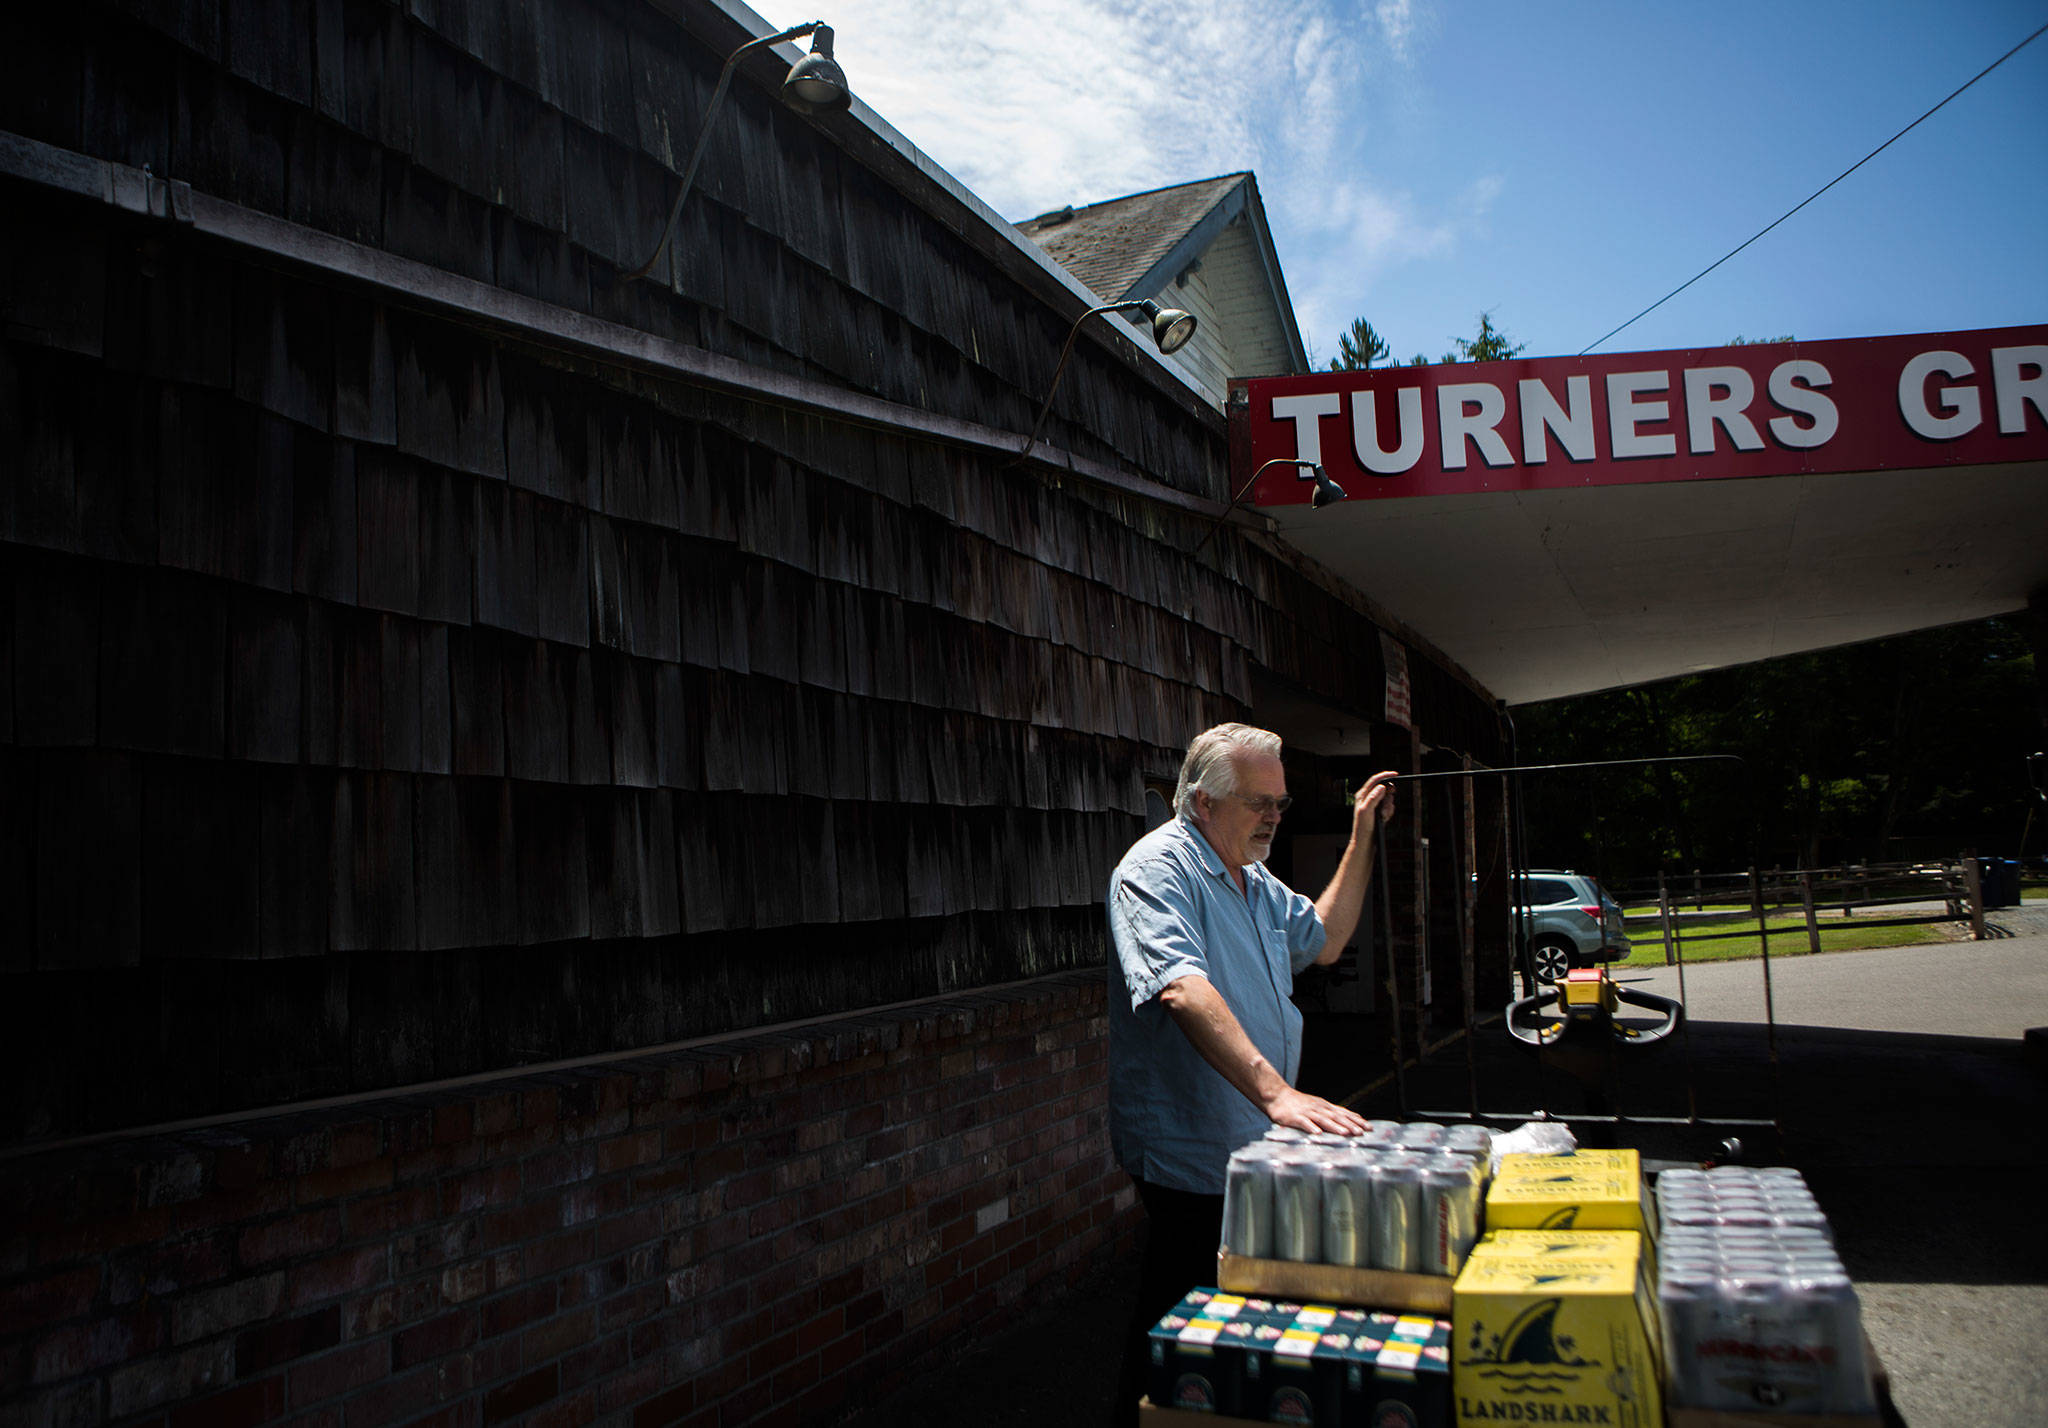 Doug Turner chats with his beer delivery man in front of his general store, Turners Neighborhood Grocery, on Friday in Lake Stevens. He relies on beer sales to stay in business. (Olivia Vanni / The Herald)